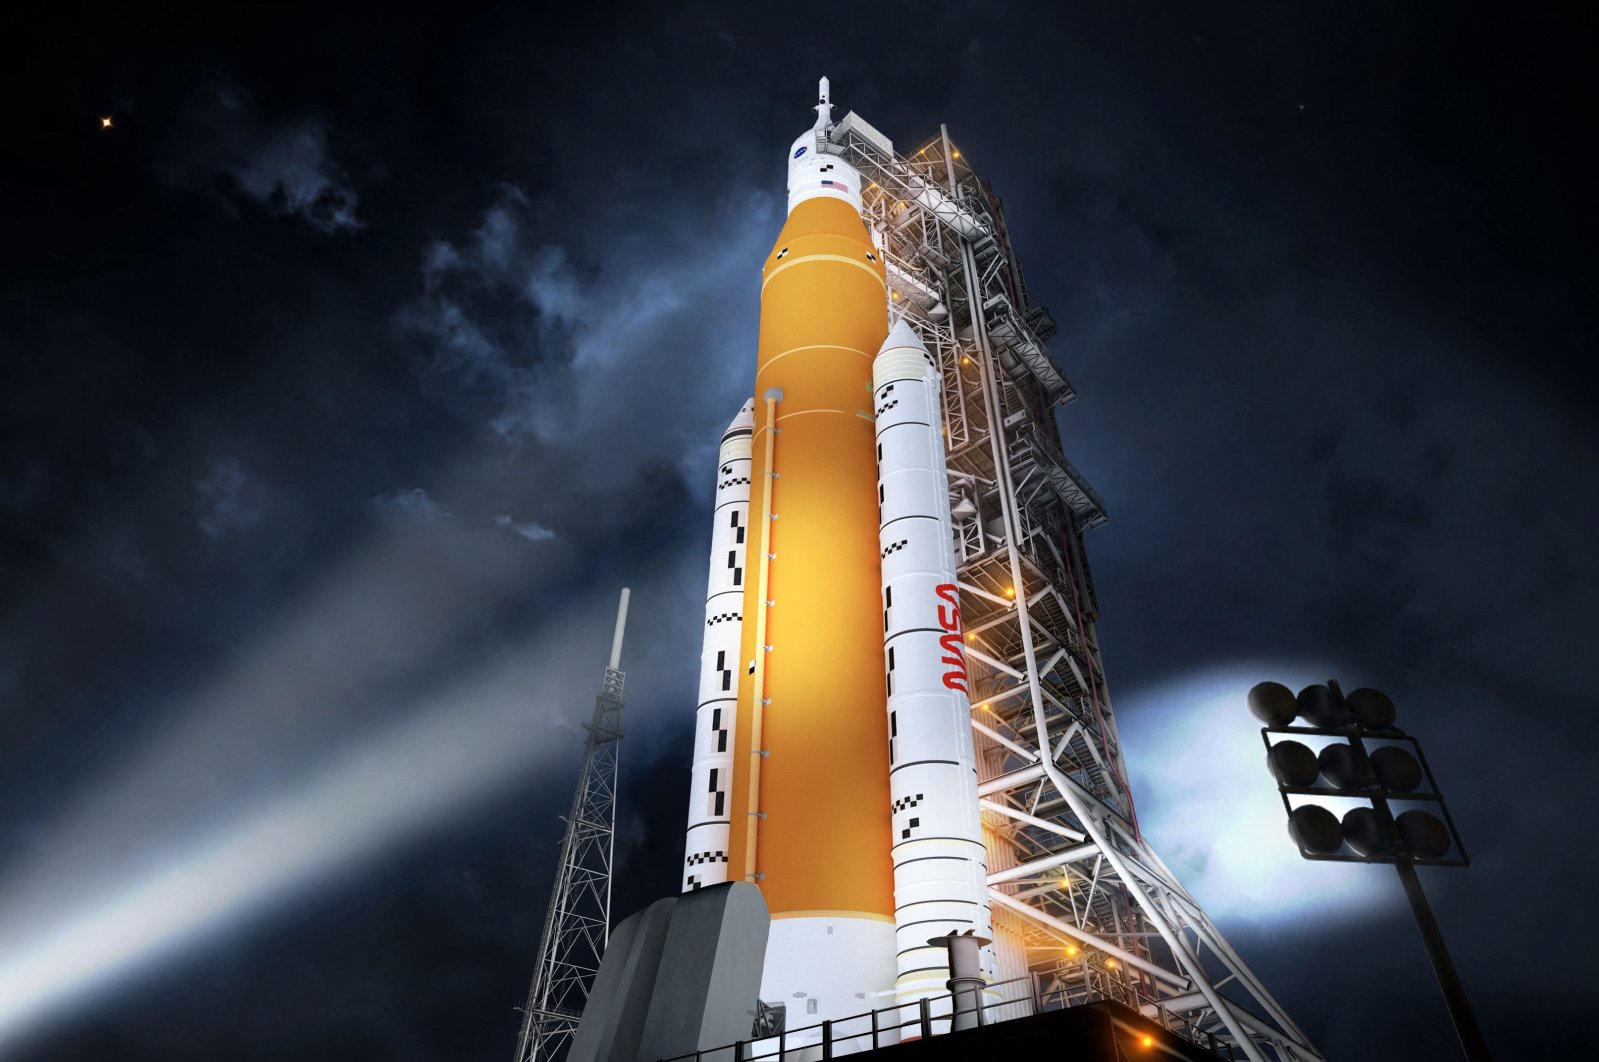 NASA&#039;s new rocket, the Space Launch System (SLS), in its Block 1 crew vehicle configuration that will send astronauts to the Moon on the Artemis missions, Aug. 19, 2014. (NASA via AFP)